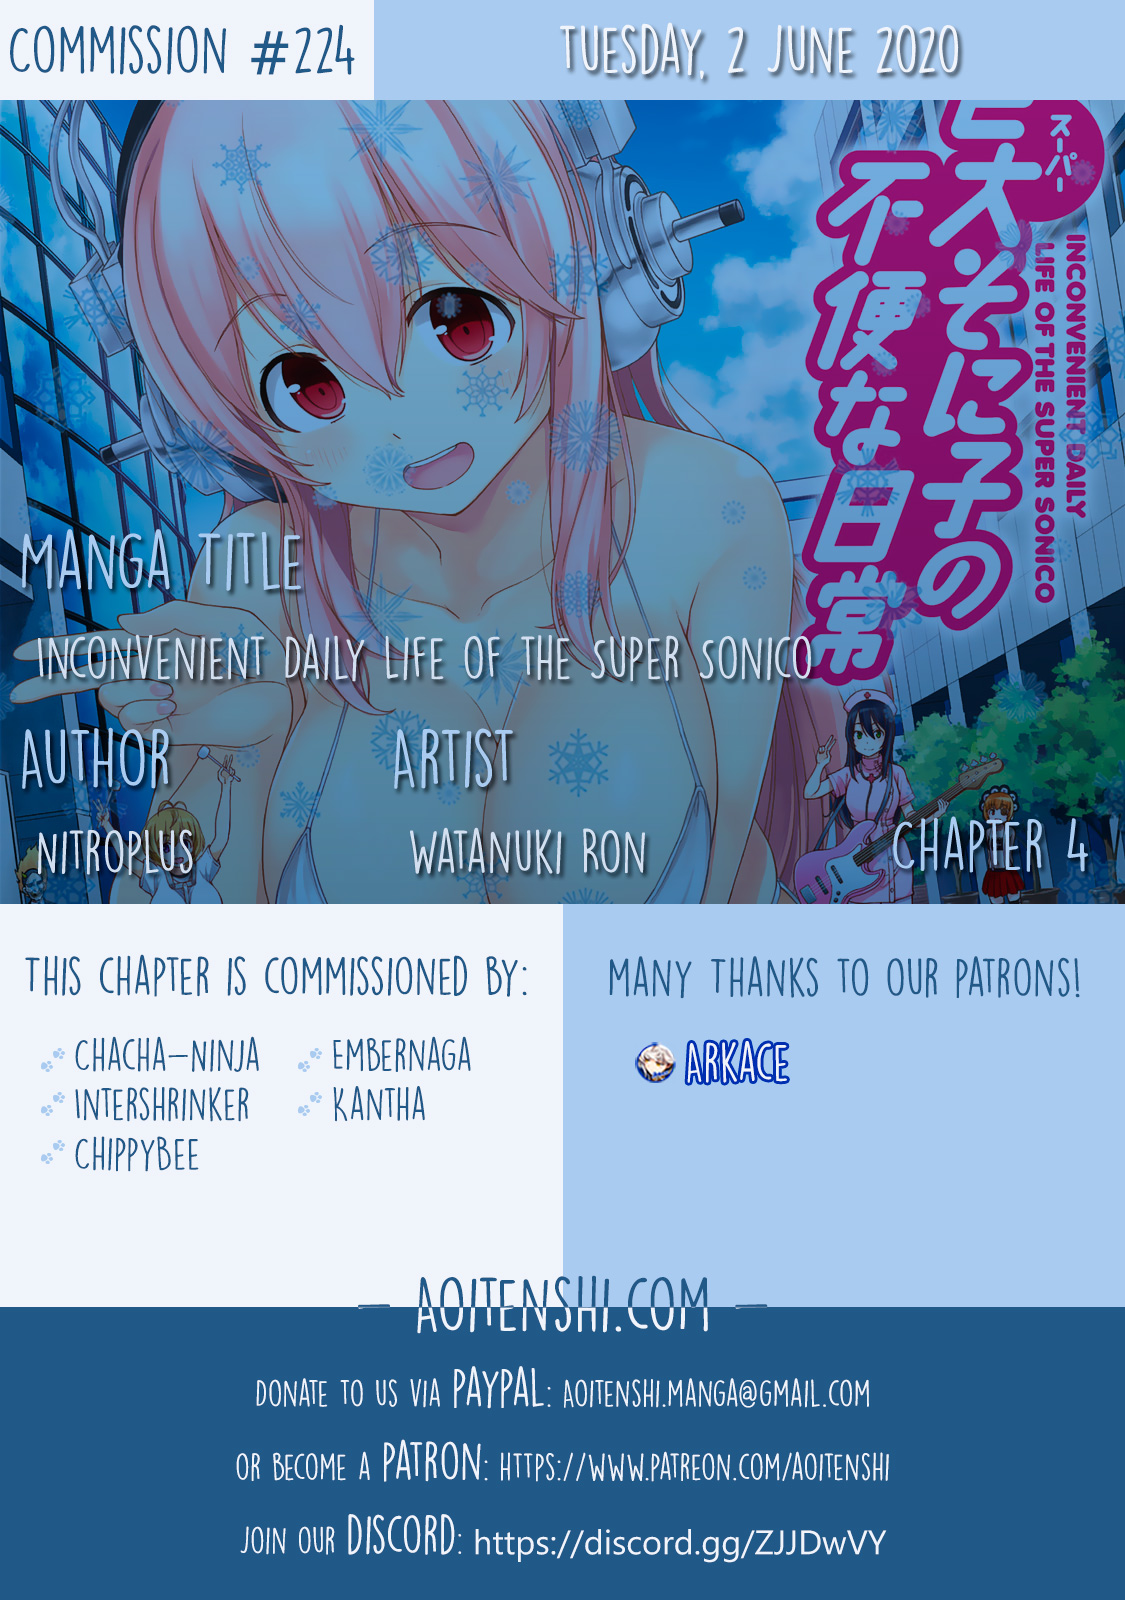 Inconvenient Daily Life of the Super Sonico!!! Vol. 1 Ch. 4 Special